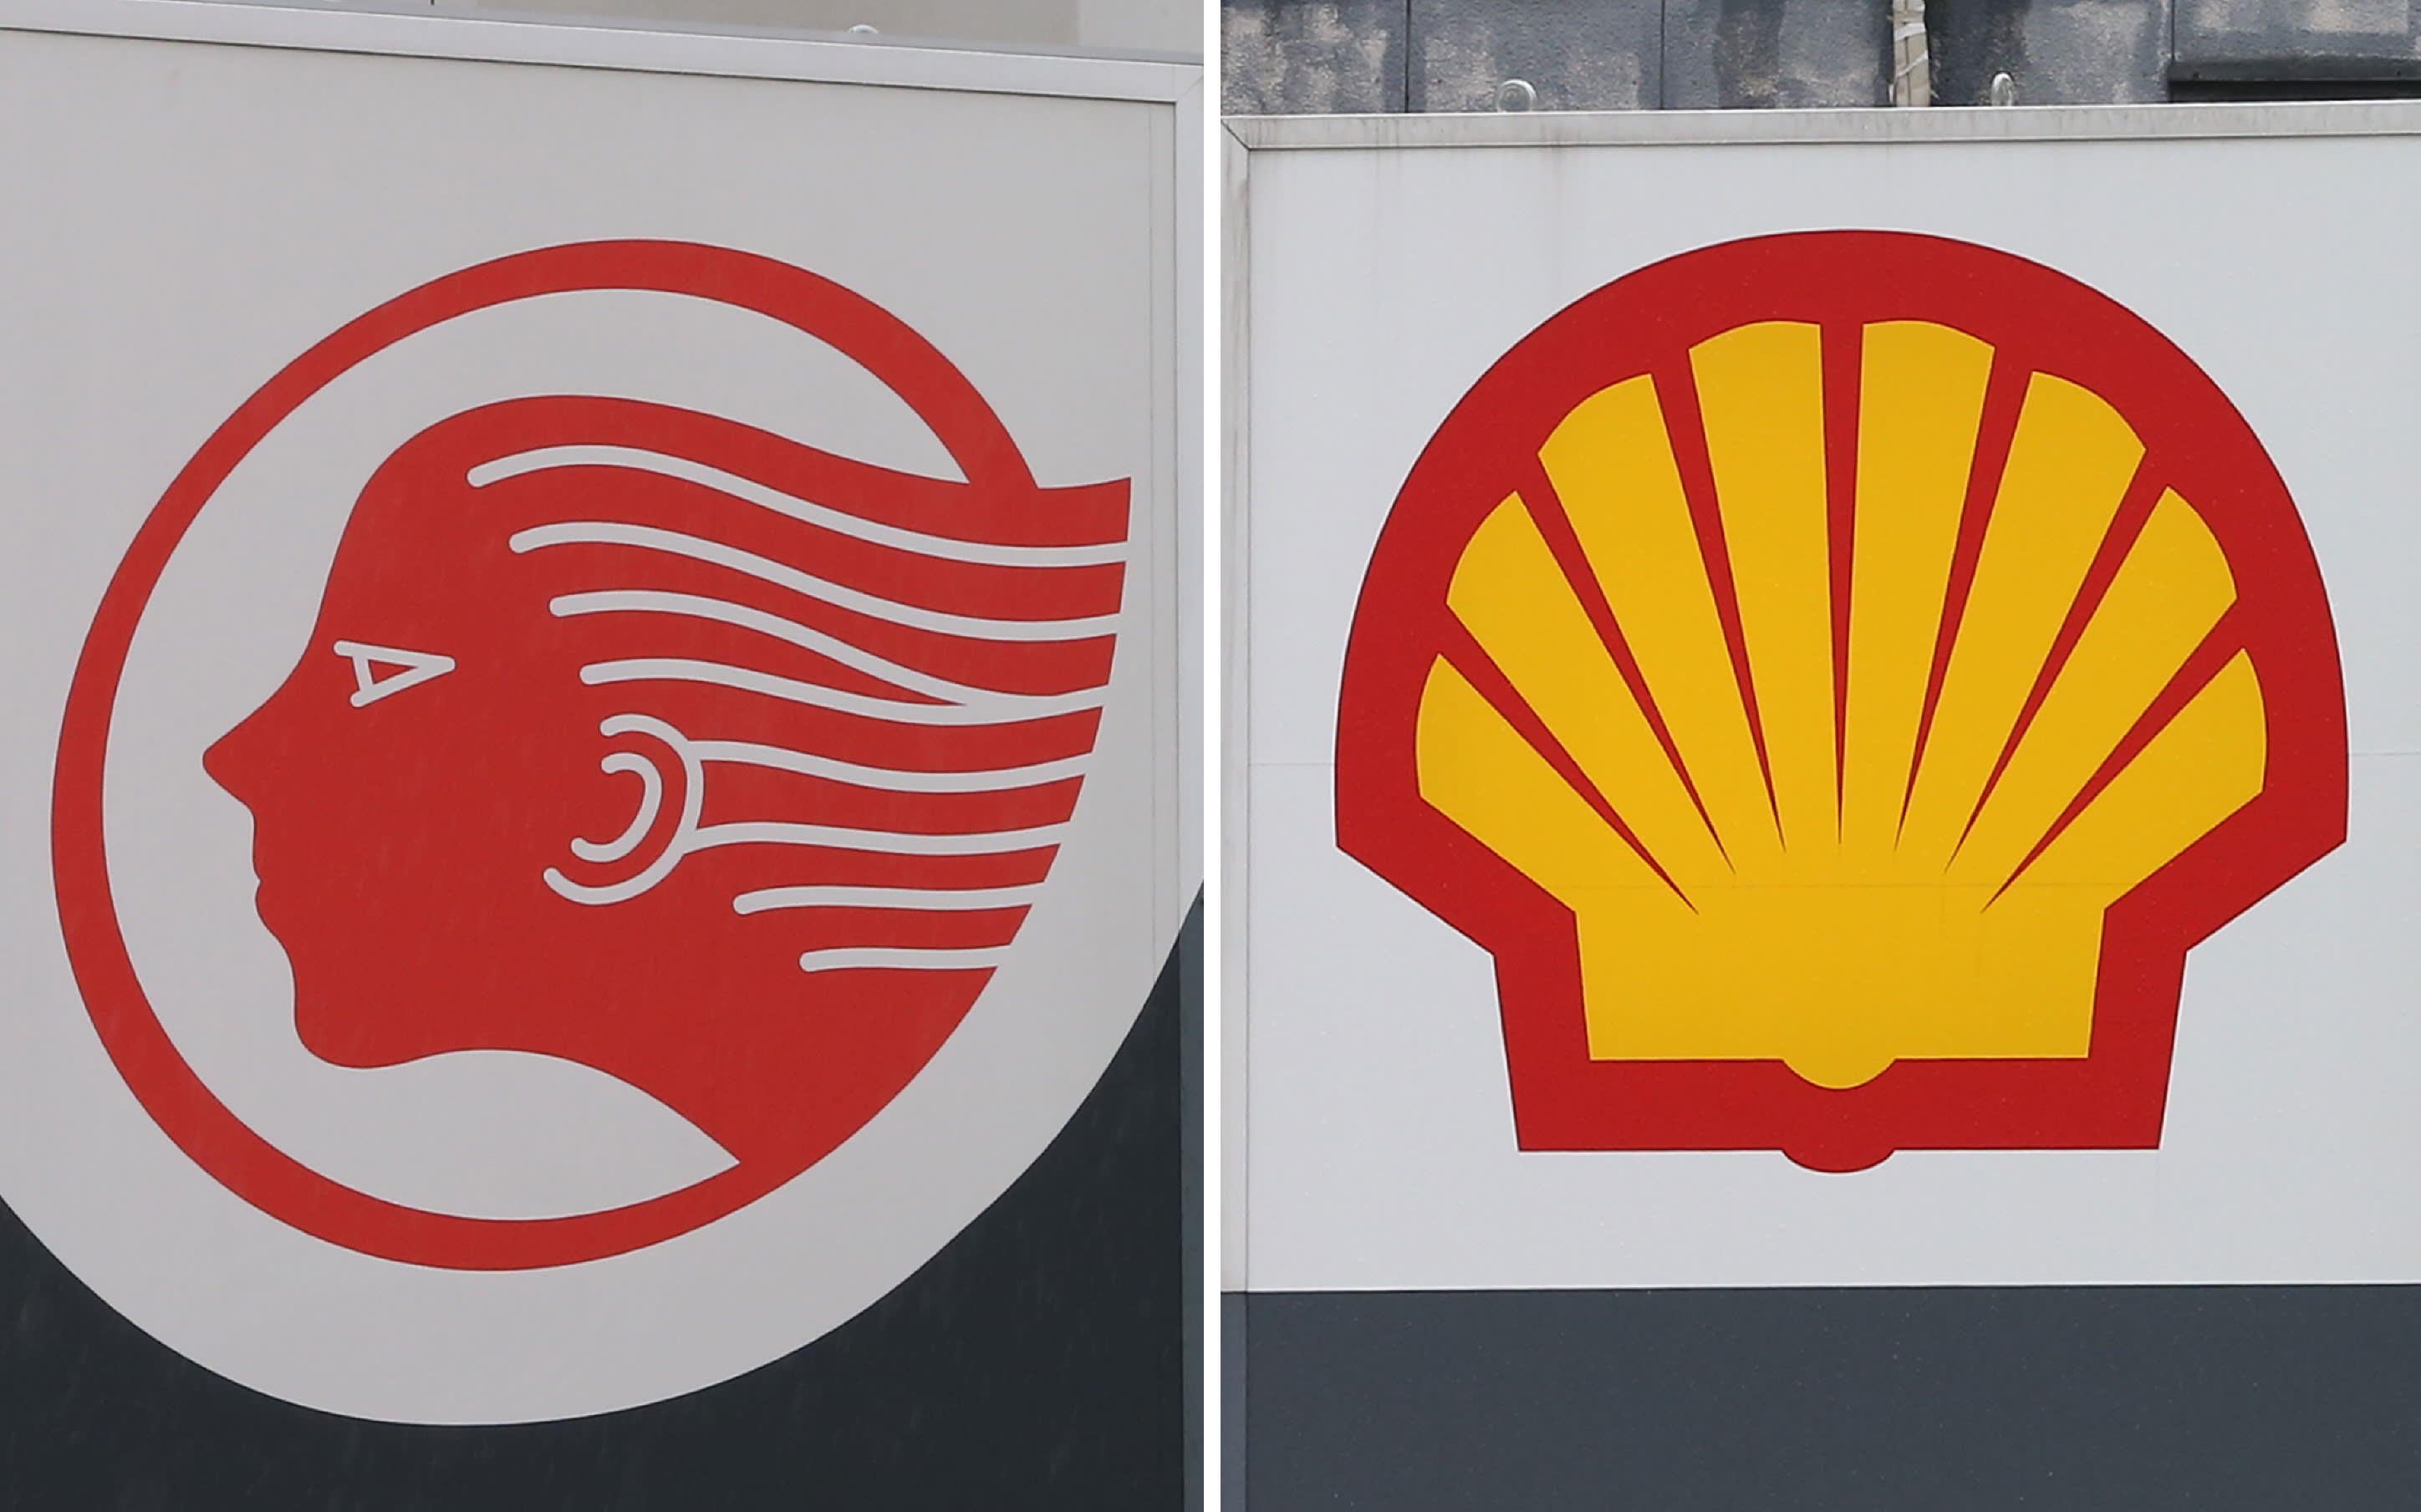 Idemitsu and Showa Shell to deepen management ties - Nikkei Asian Review